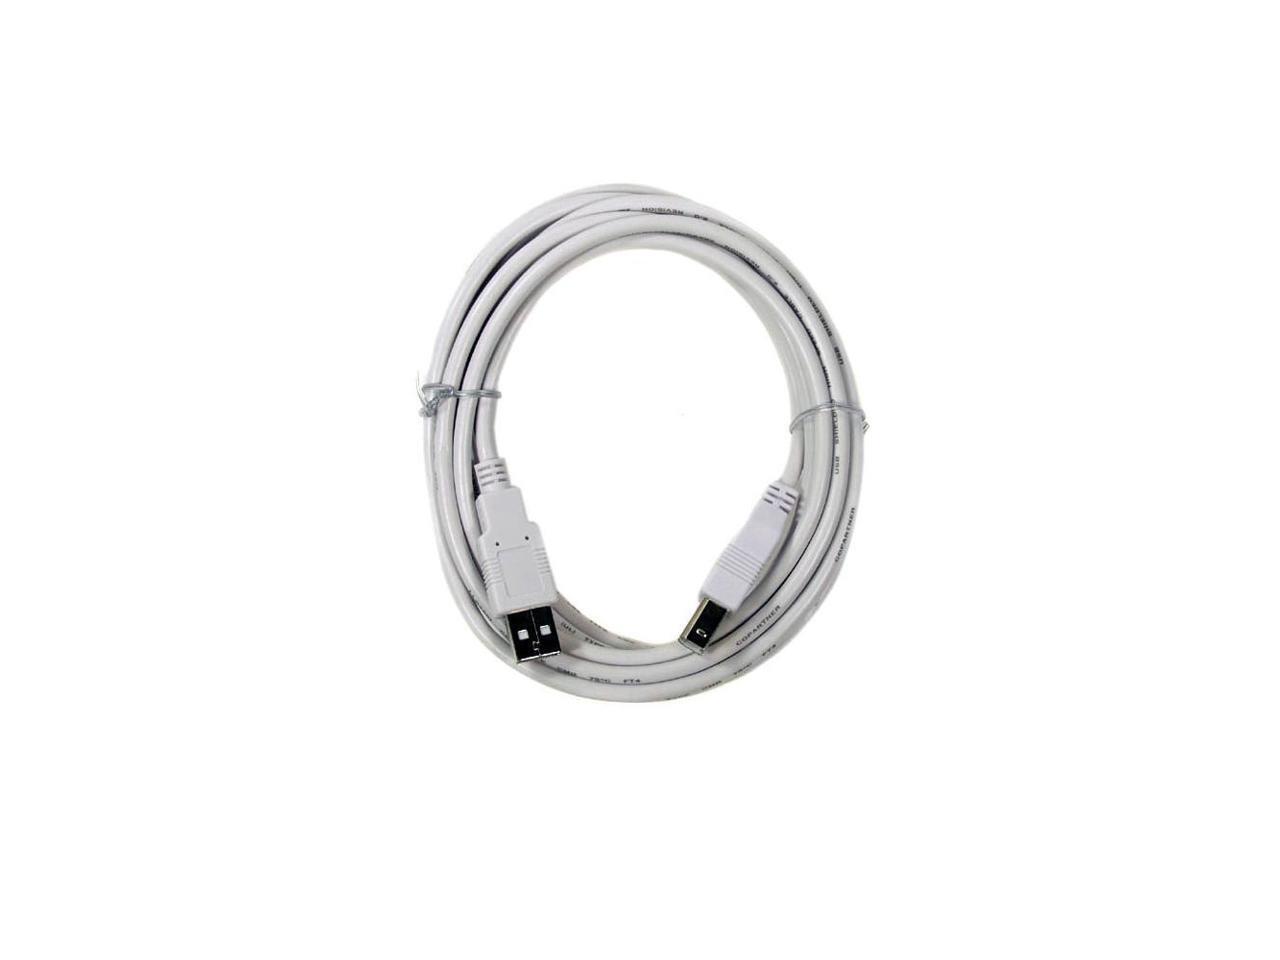 Fuji Labs 10Ft A-Male to B-Male USB2.0 Cable (4 Pack)